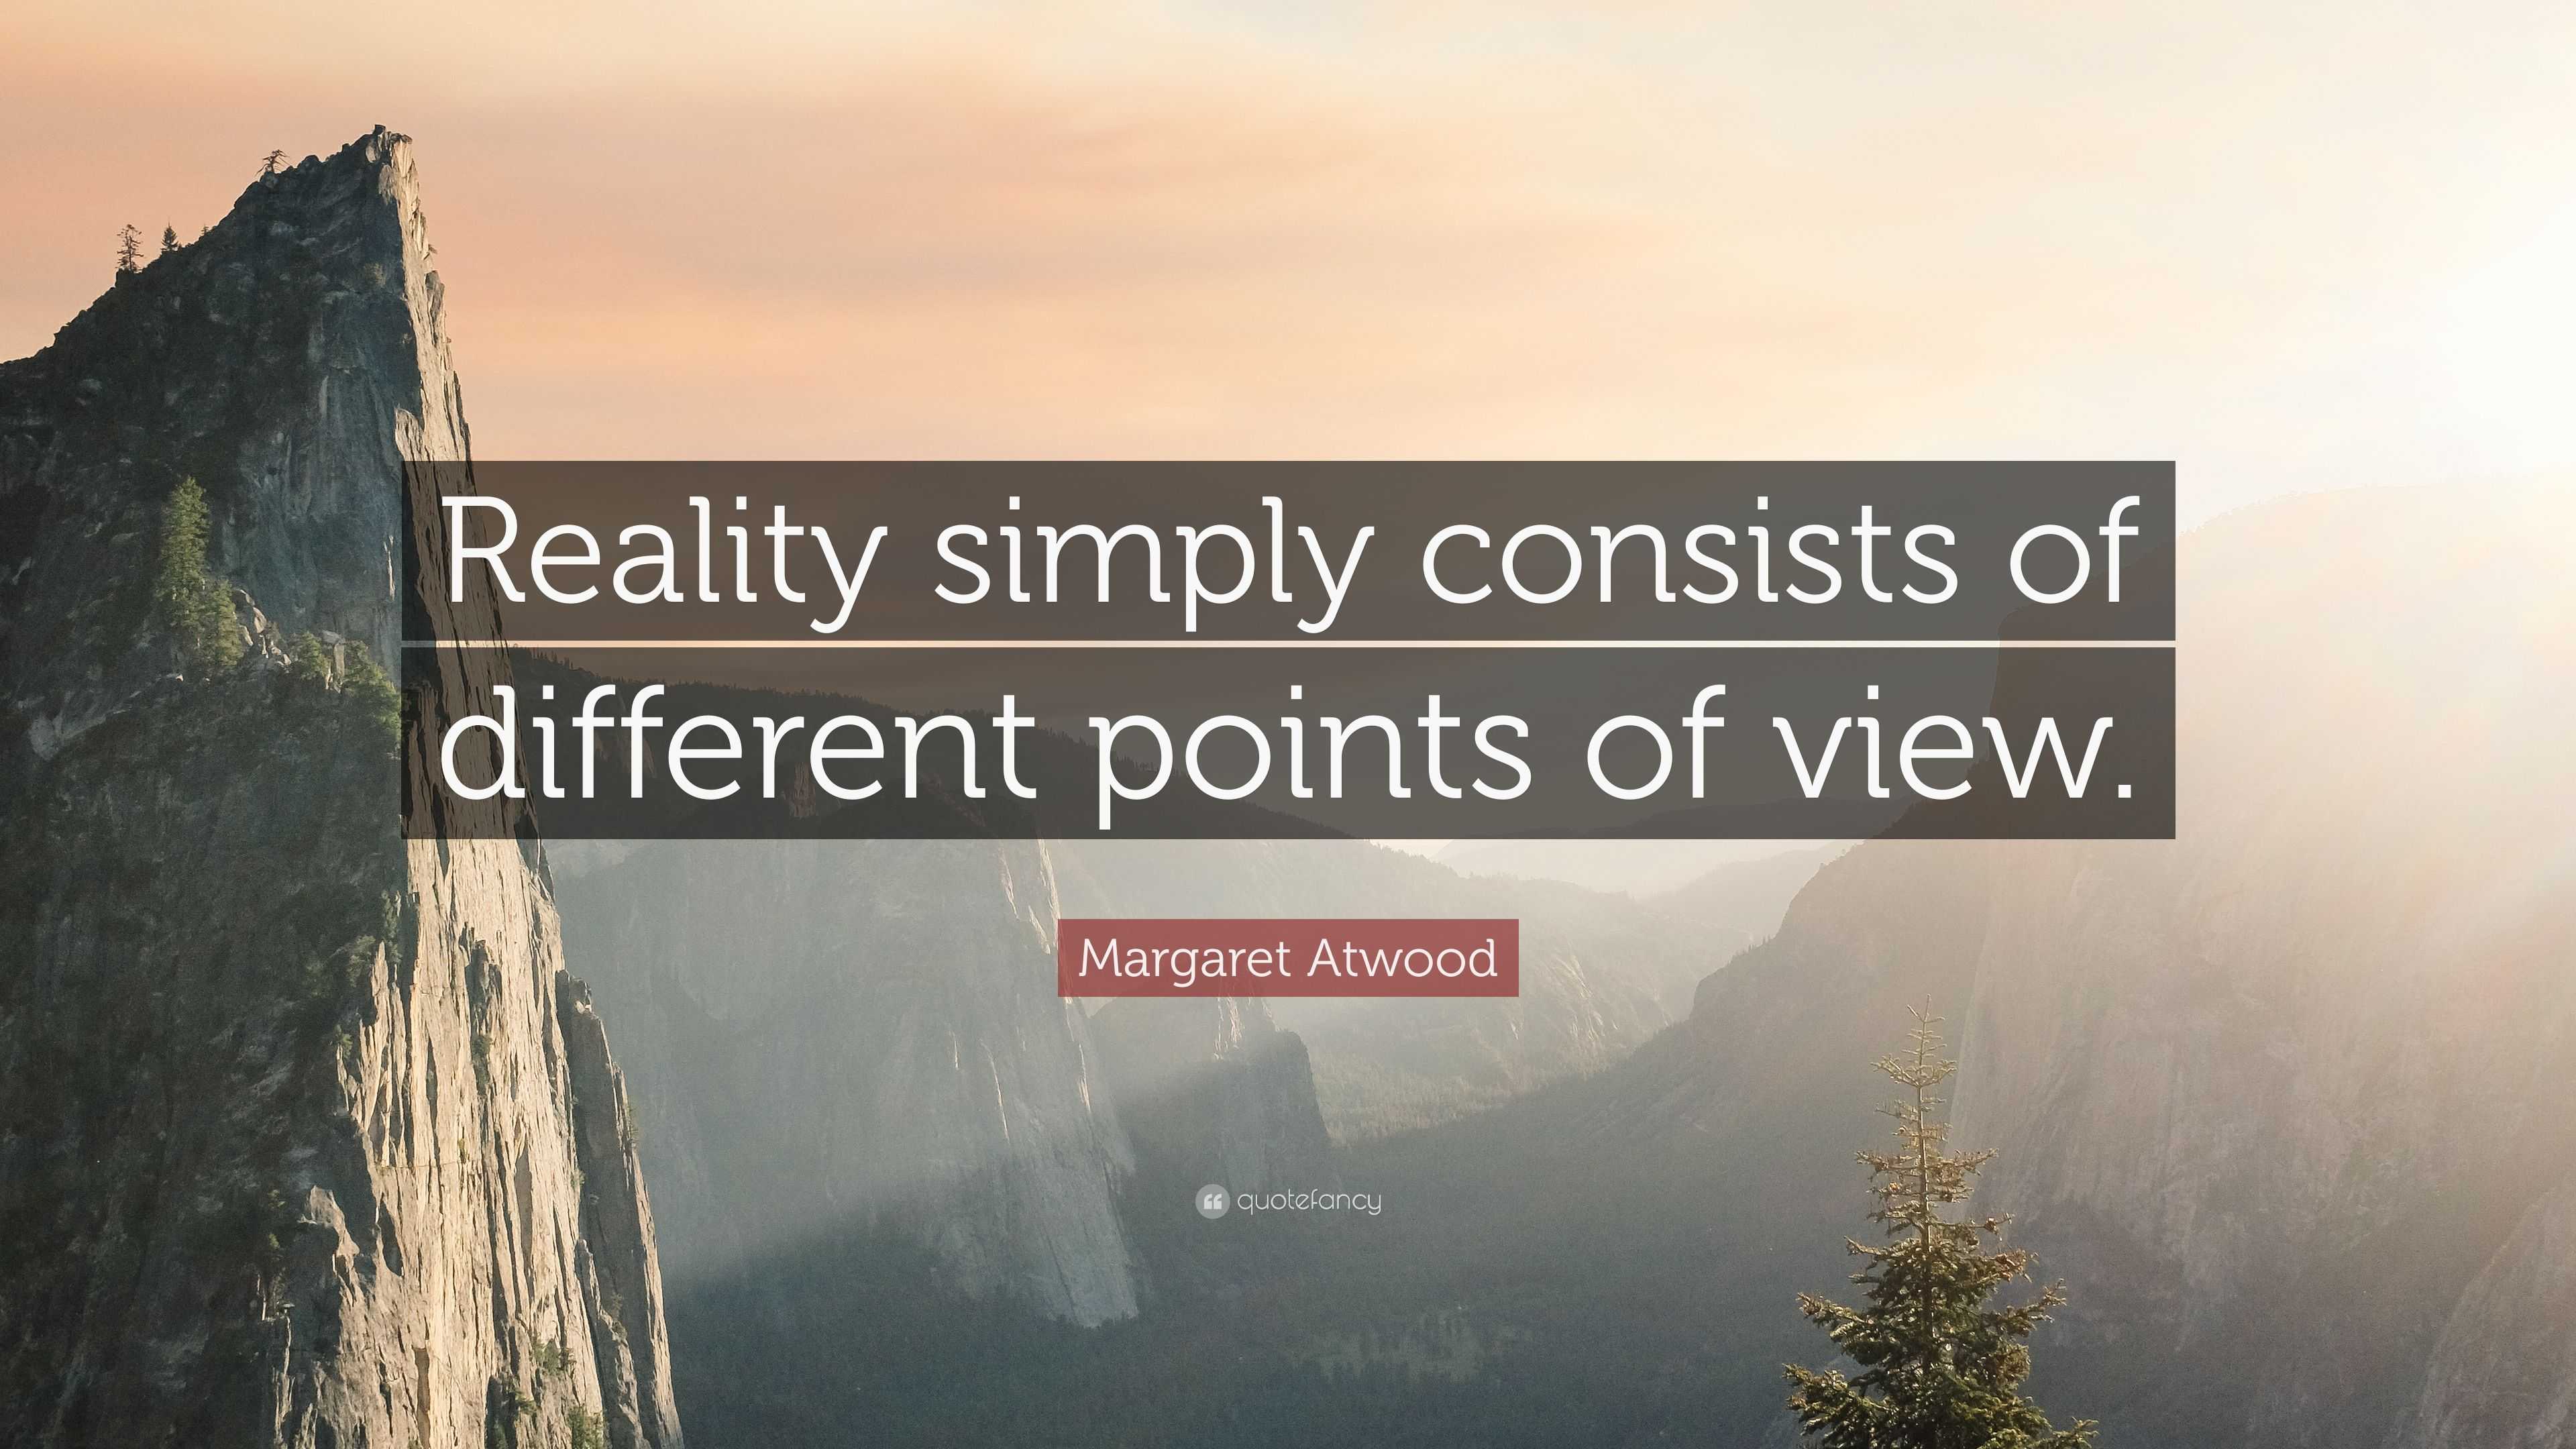 Margaret Atwood Quote: “Reality simply consists of different points of ...